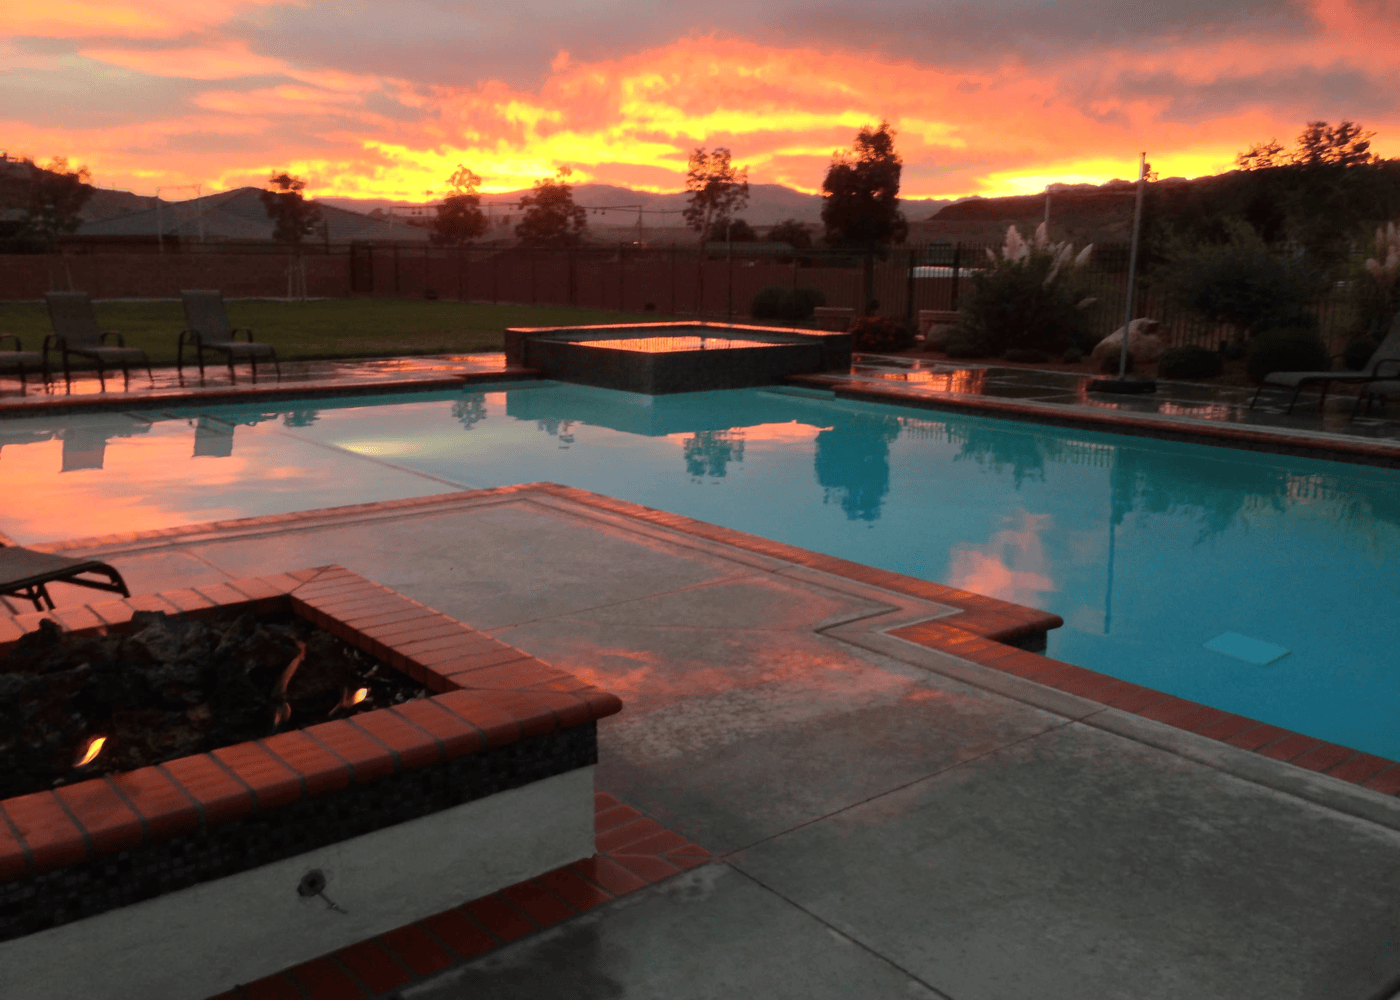 An aesthetic view of an in-ground swimming pool in the evening, showing the sunset, with a firepit in the foreground and the rest of the backyard in the background. The pool is illuminated, casting a gentle glow on the water's surface with the pool's lights.